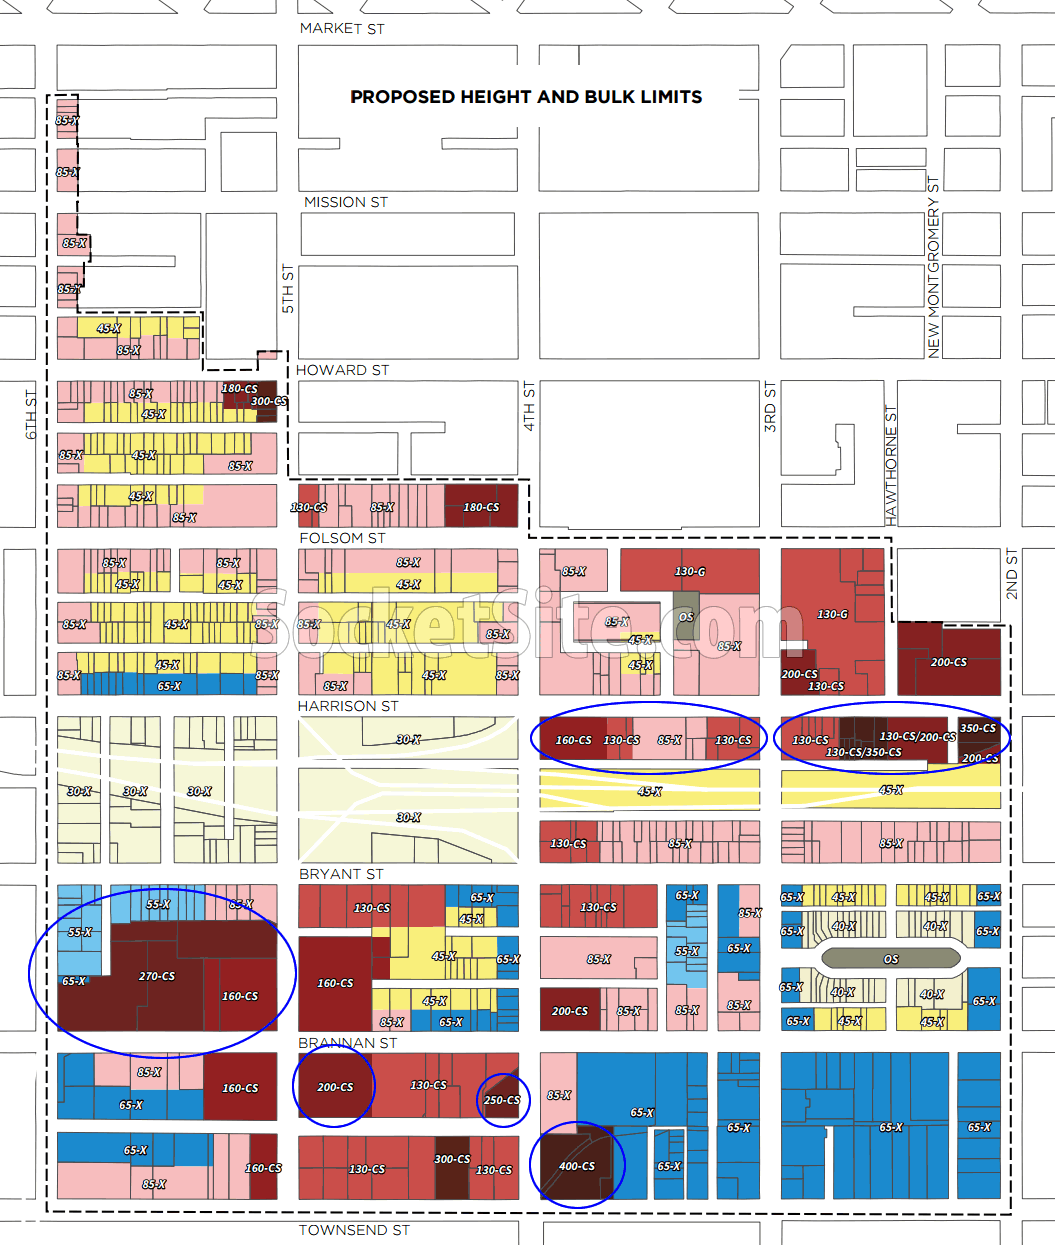 Central SoMa Plan Building Height and Bulk Limits 2016